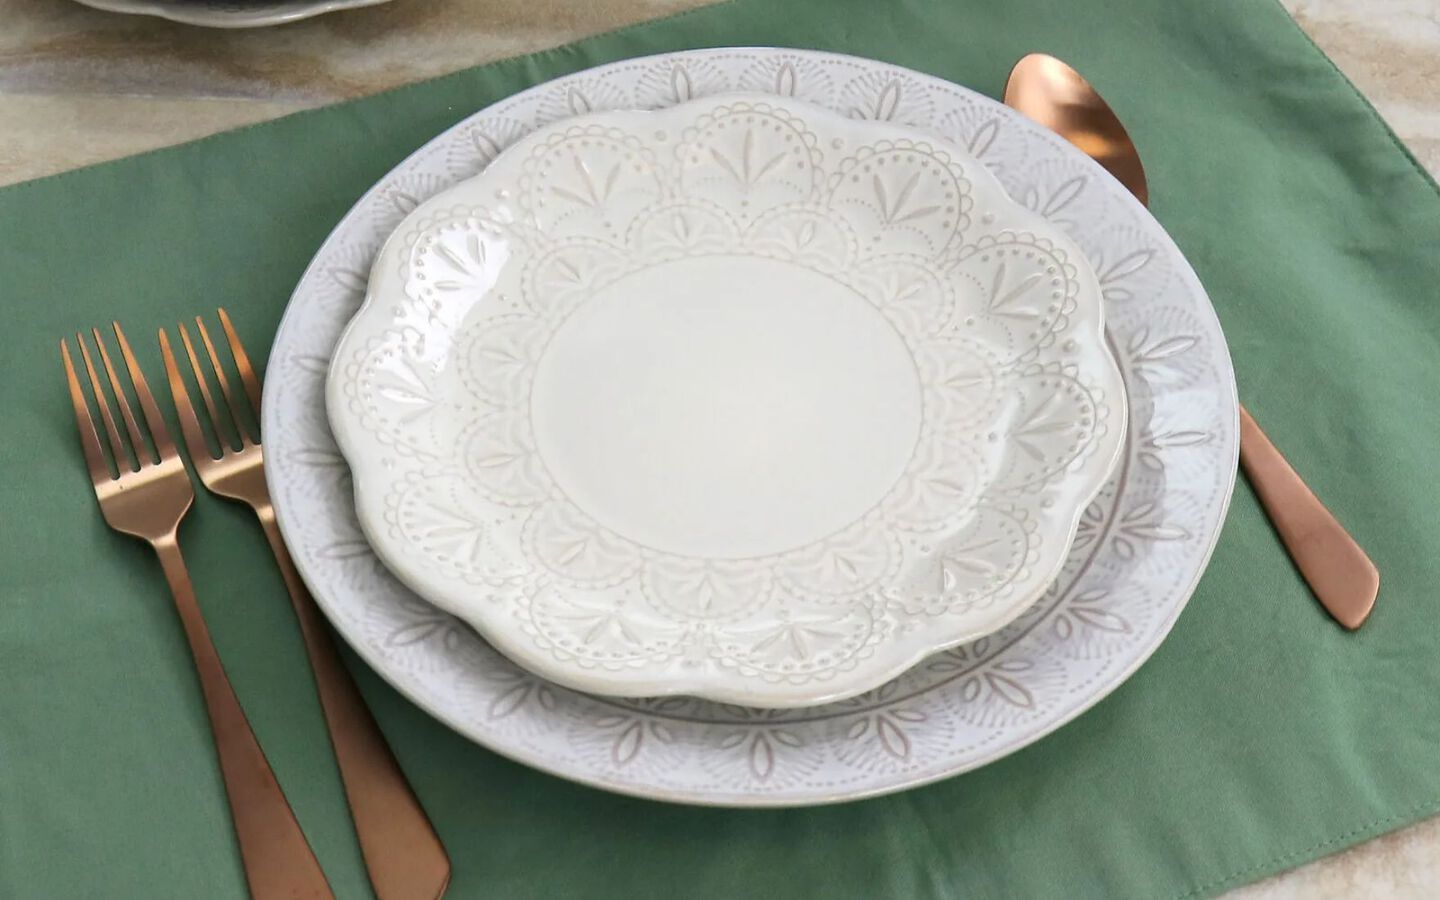 Place setting with white plates, bronze silverware, and green placemat